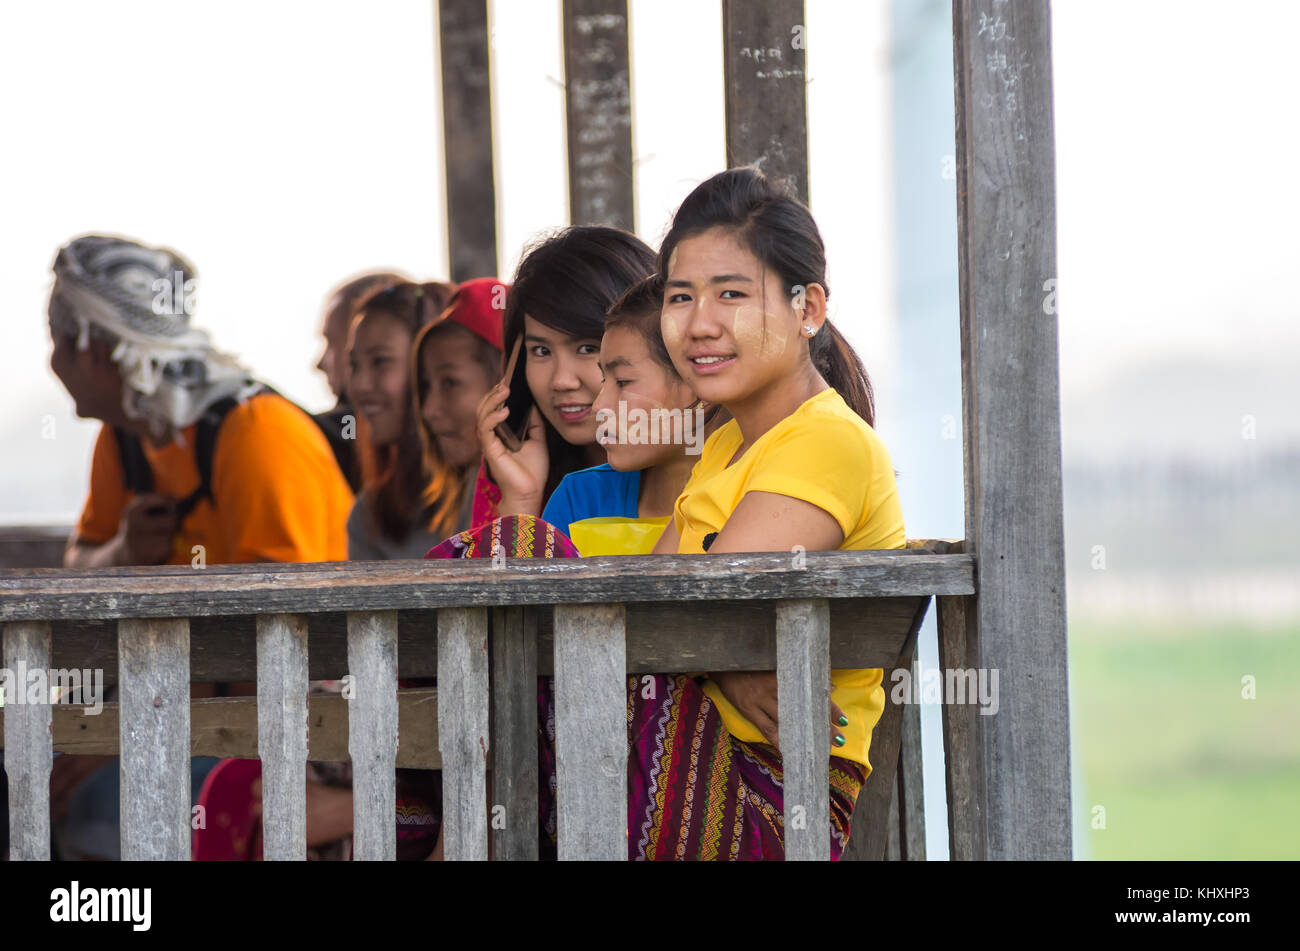 MANDALAY, MYANMAR - MARCH 13 : Unidentified Burmese women smiling at the ubein bridge on March 13, 2016 in Mandalay, Myanmar. The U-Bein bridge is the Stock Photo